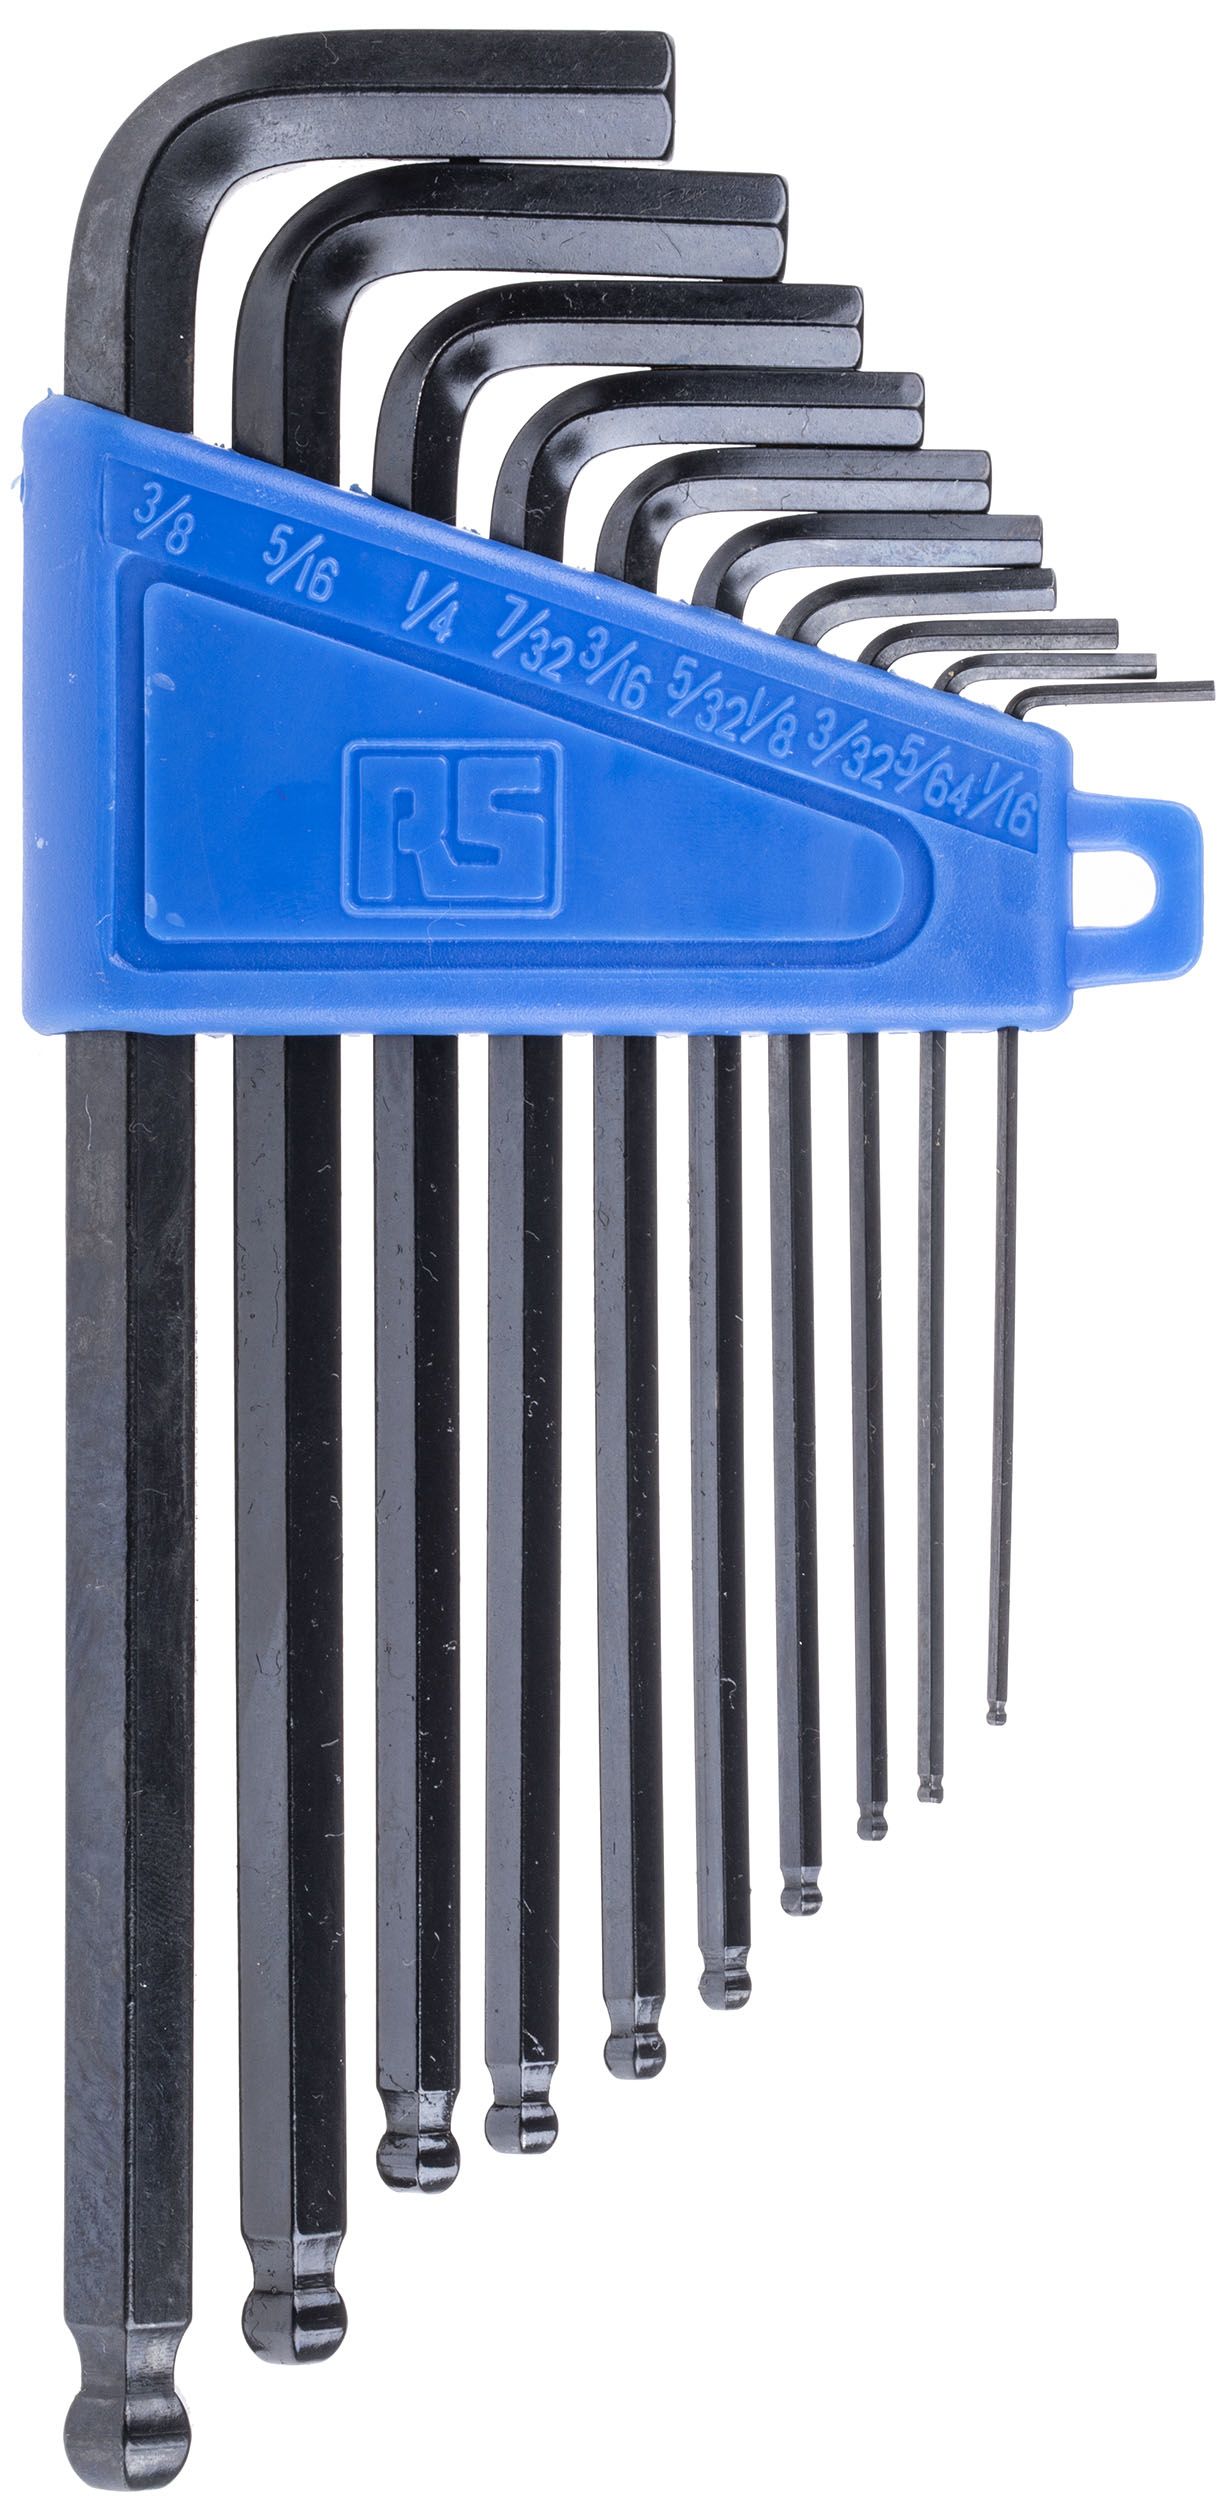 RS PRO 10 piece Hex Key Set,  L Shape 1/16in Ball End